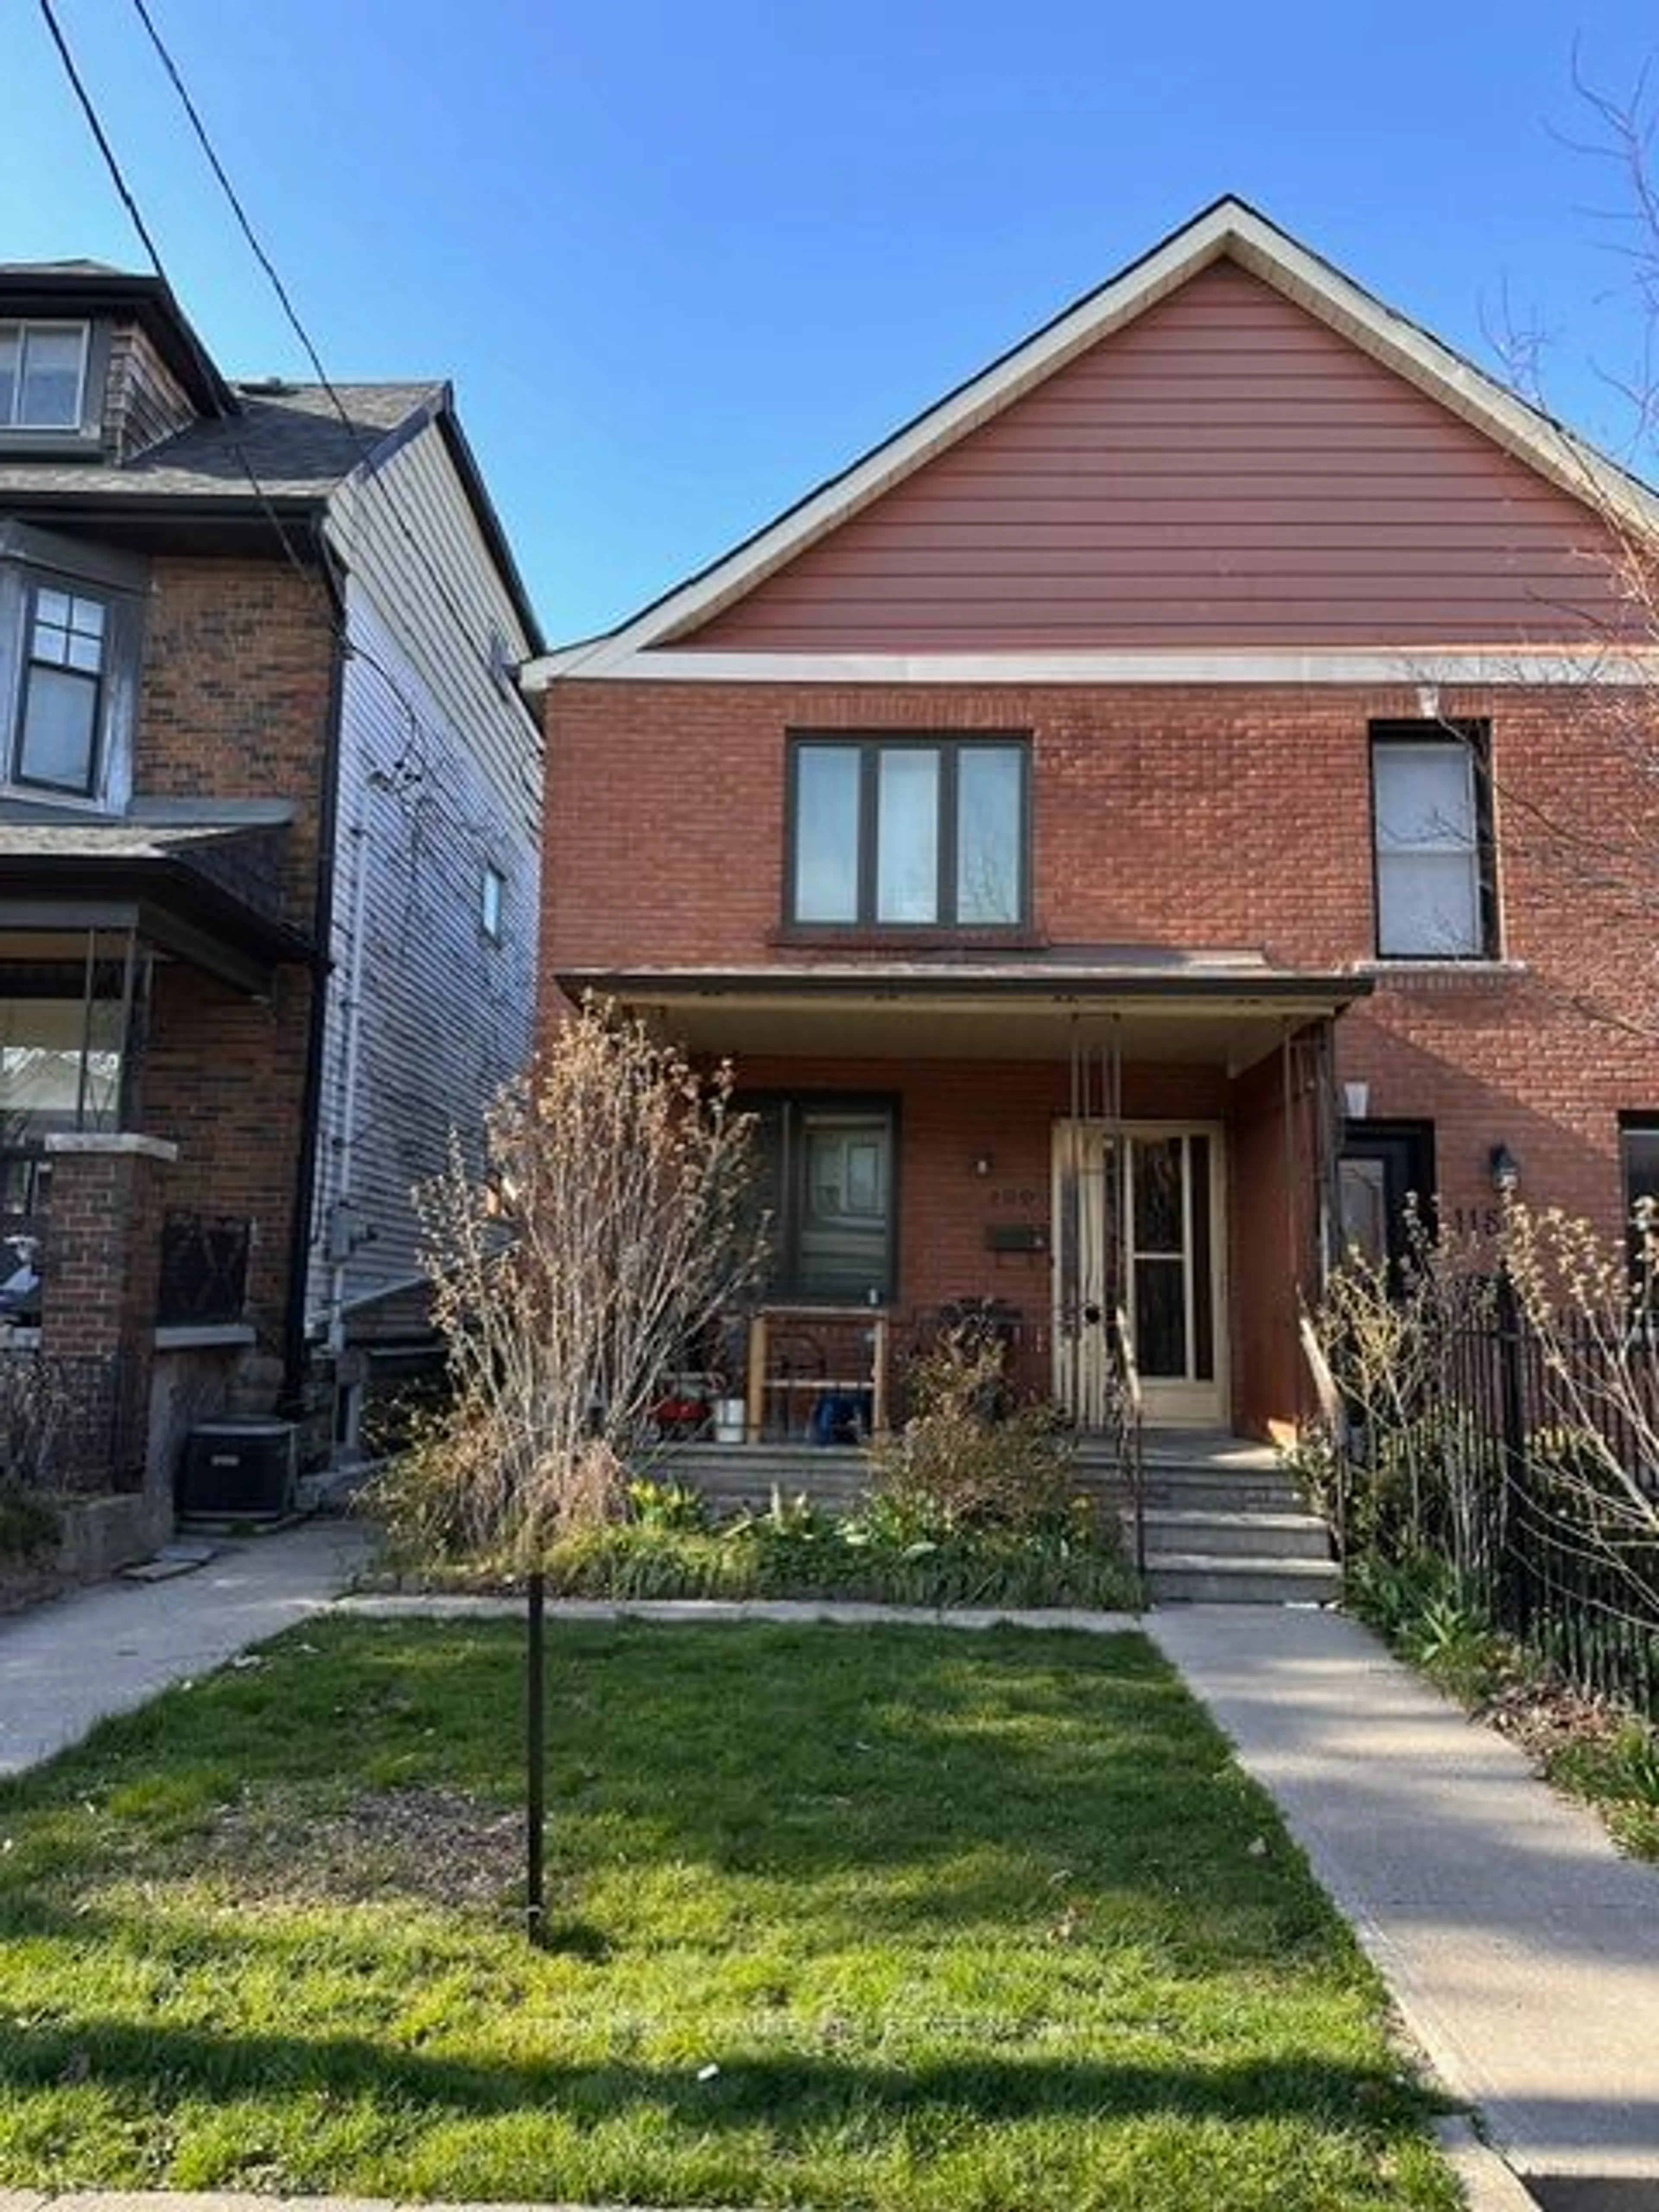 Home with brick exterior material for 120 Yarmouth Rd, Toronto Ontario M6G 1X2